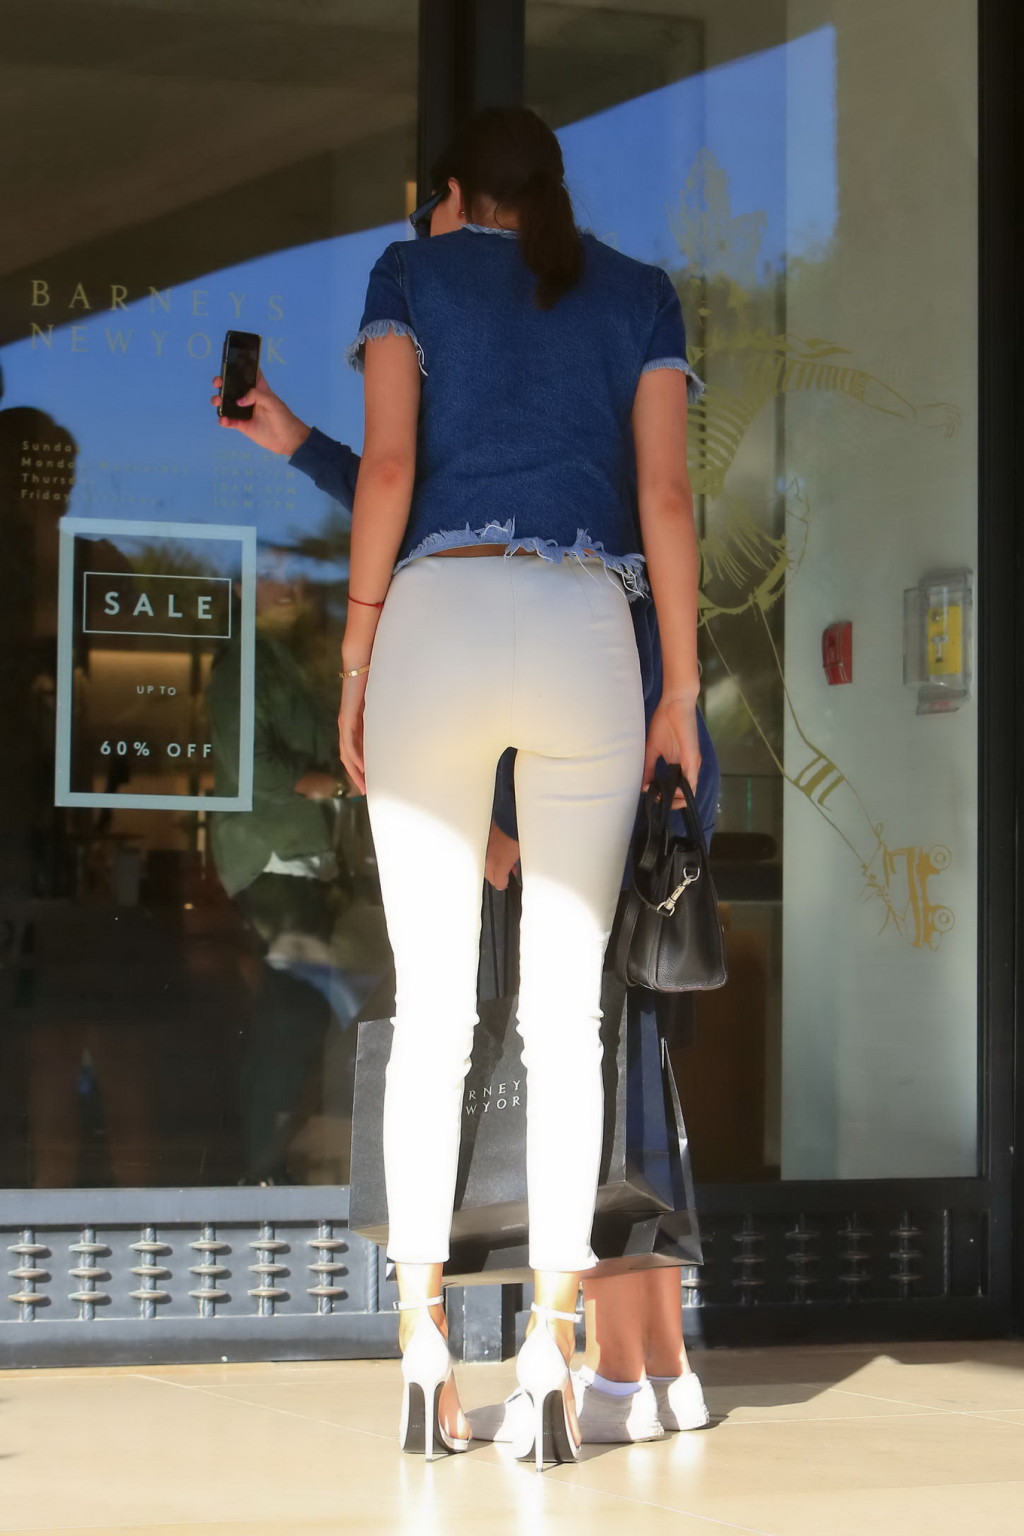 Kendall Jenner showing ass in tight white pants and denim top while shopping in  #75177174